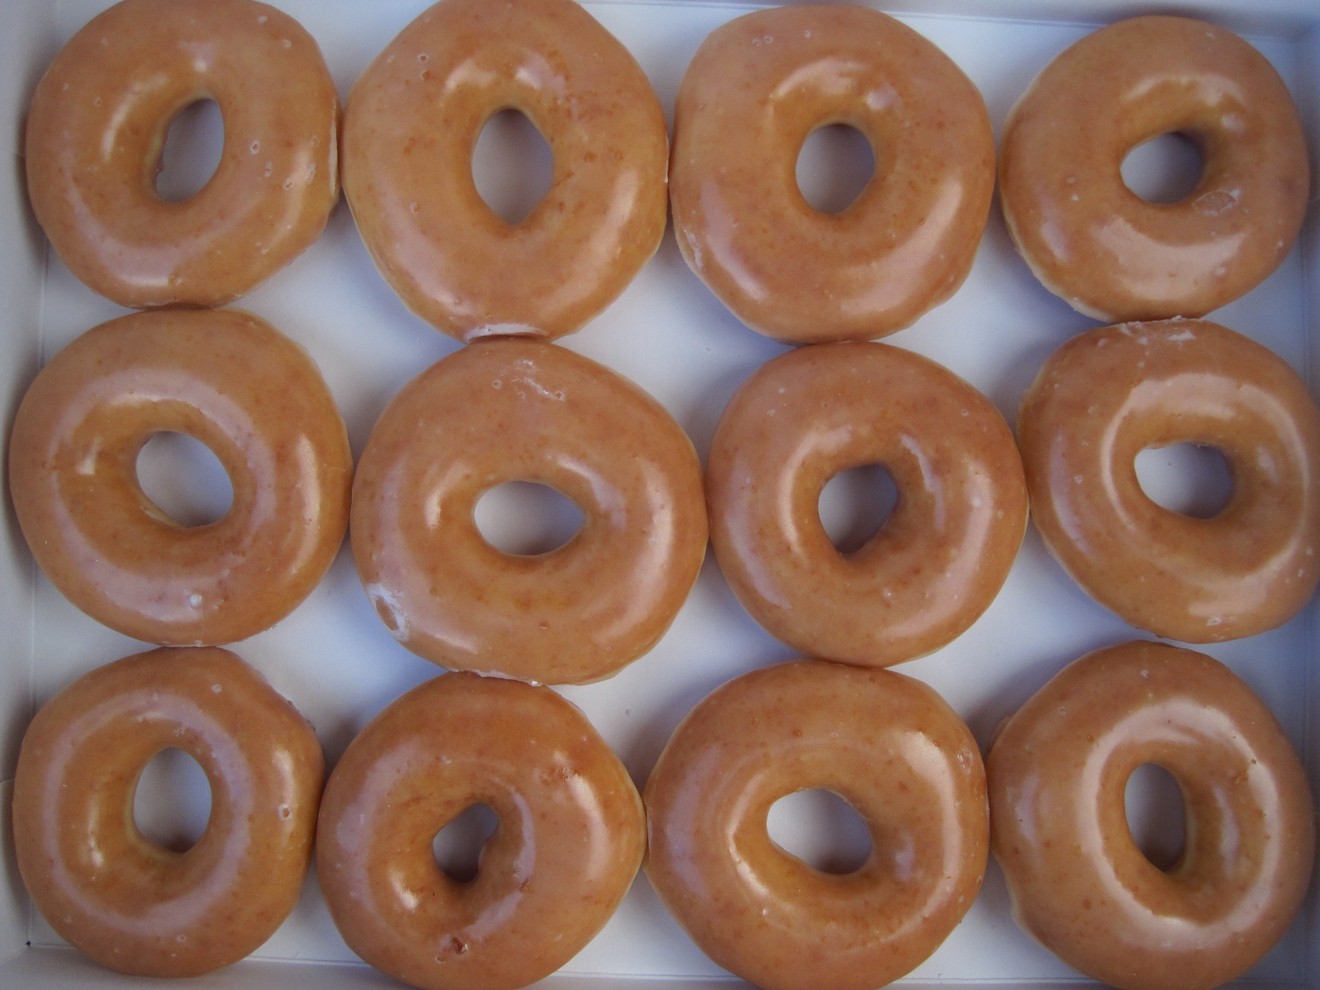 A dozen Krispy Kreme glazed doughnuts cost only 80 cents after you buy the first dozen at regular price.